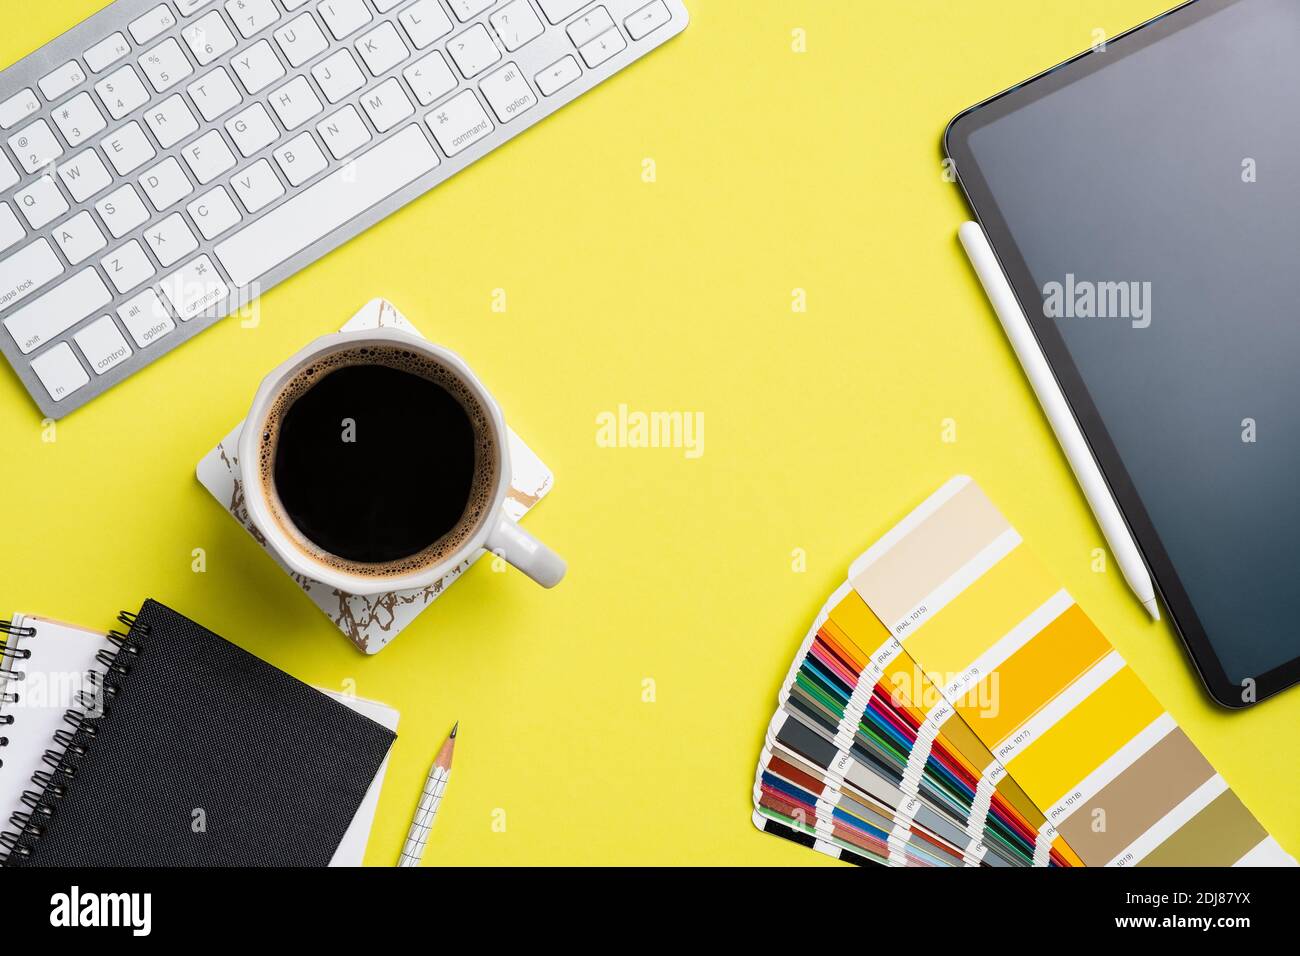 Designer desk top view with computer keyboard, graphic tablet color palette, notebook, cup of coffee on yellow background. Flat lay, view from above. Stock Photo